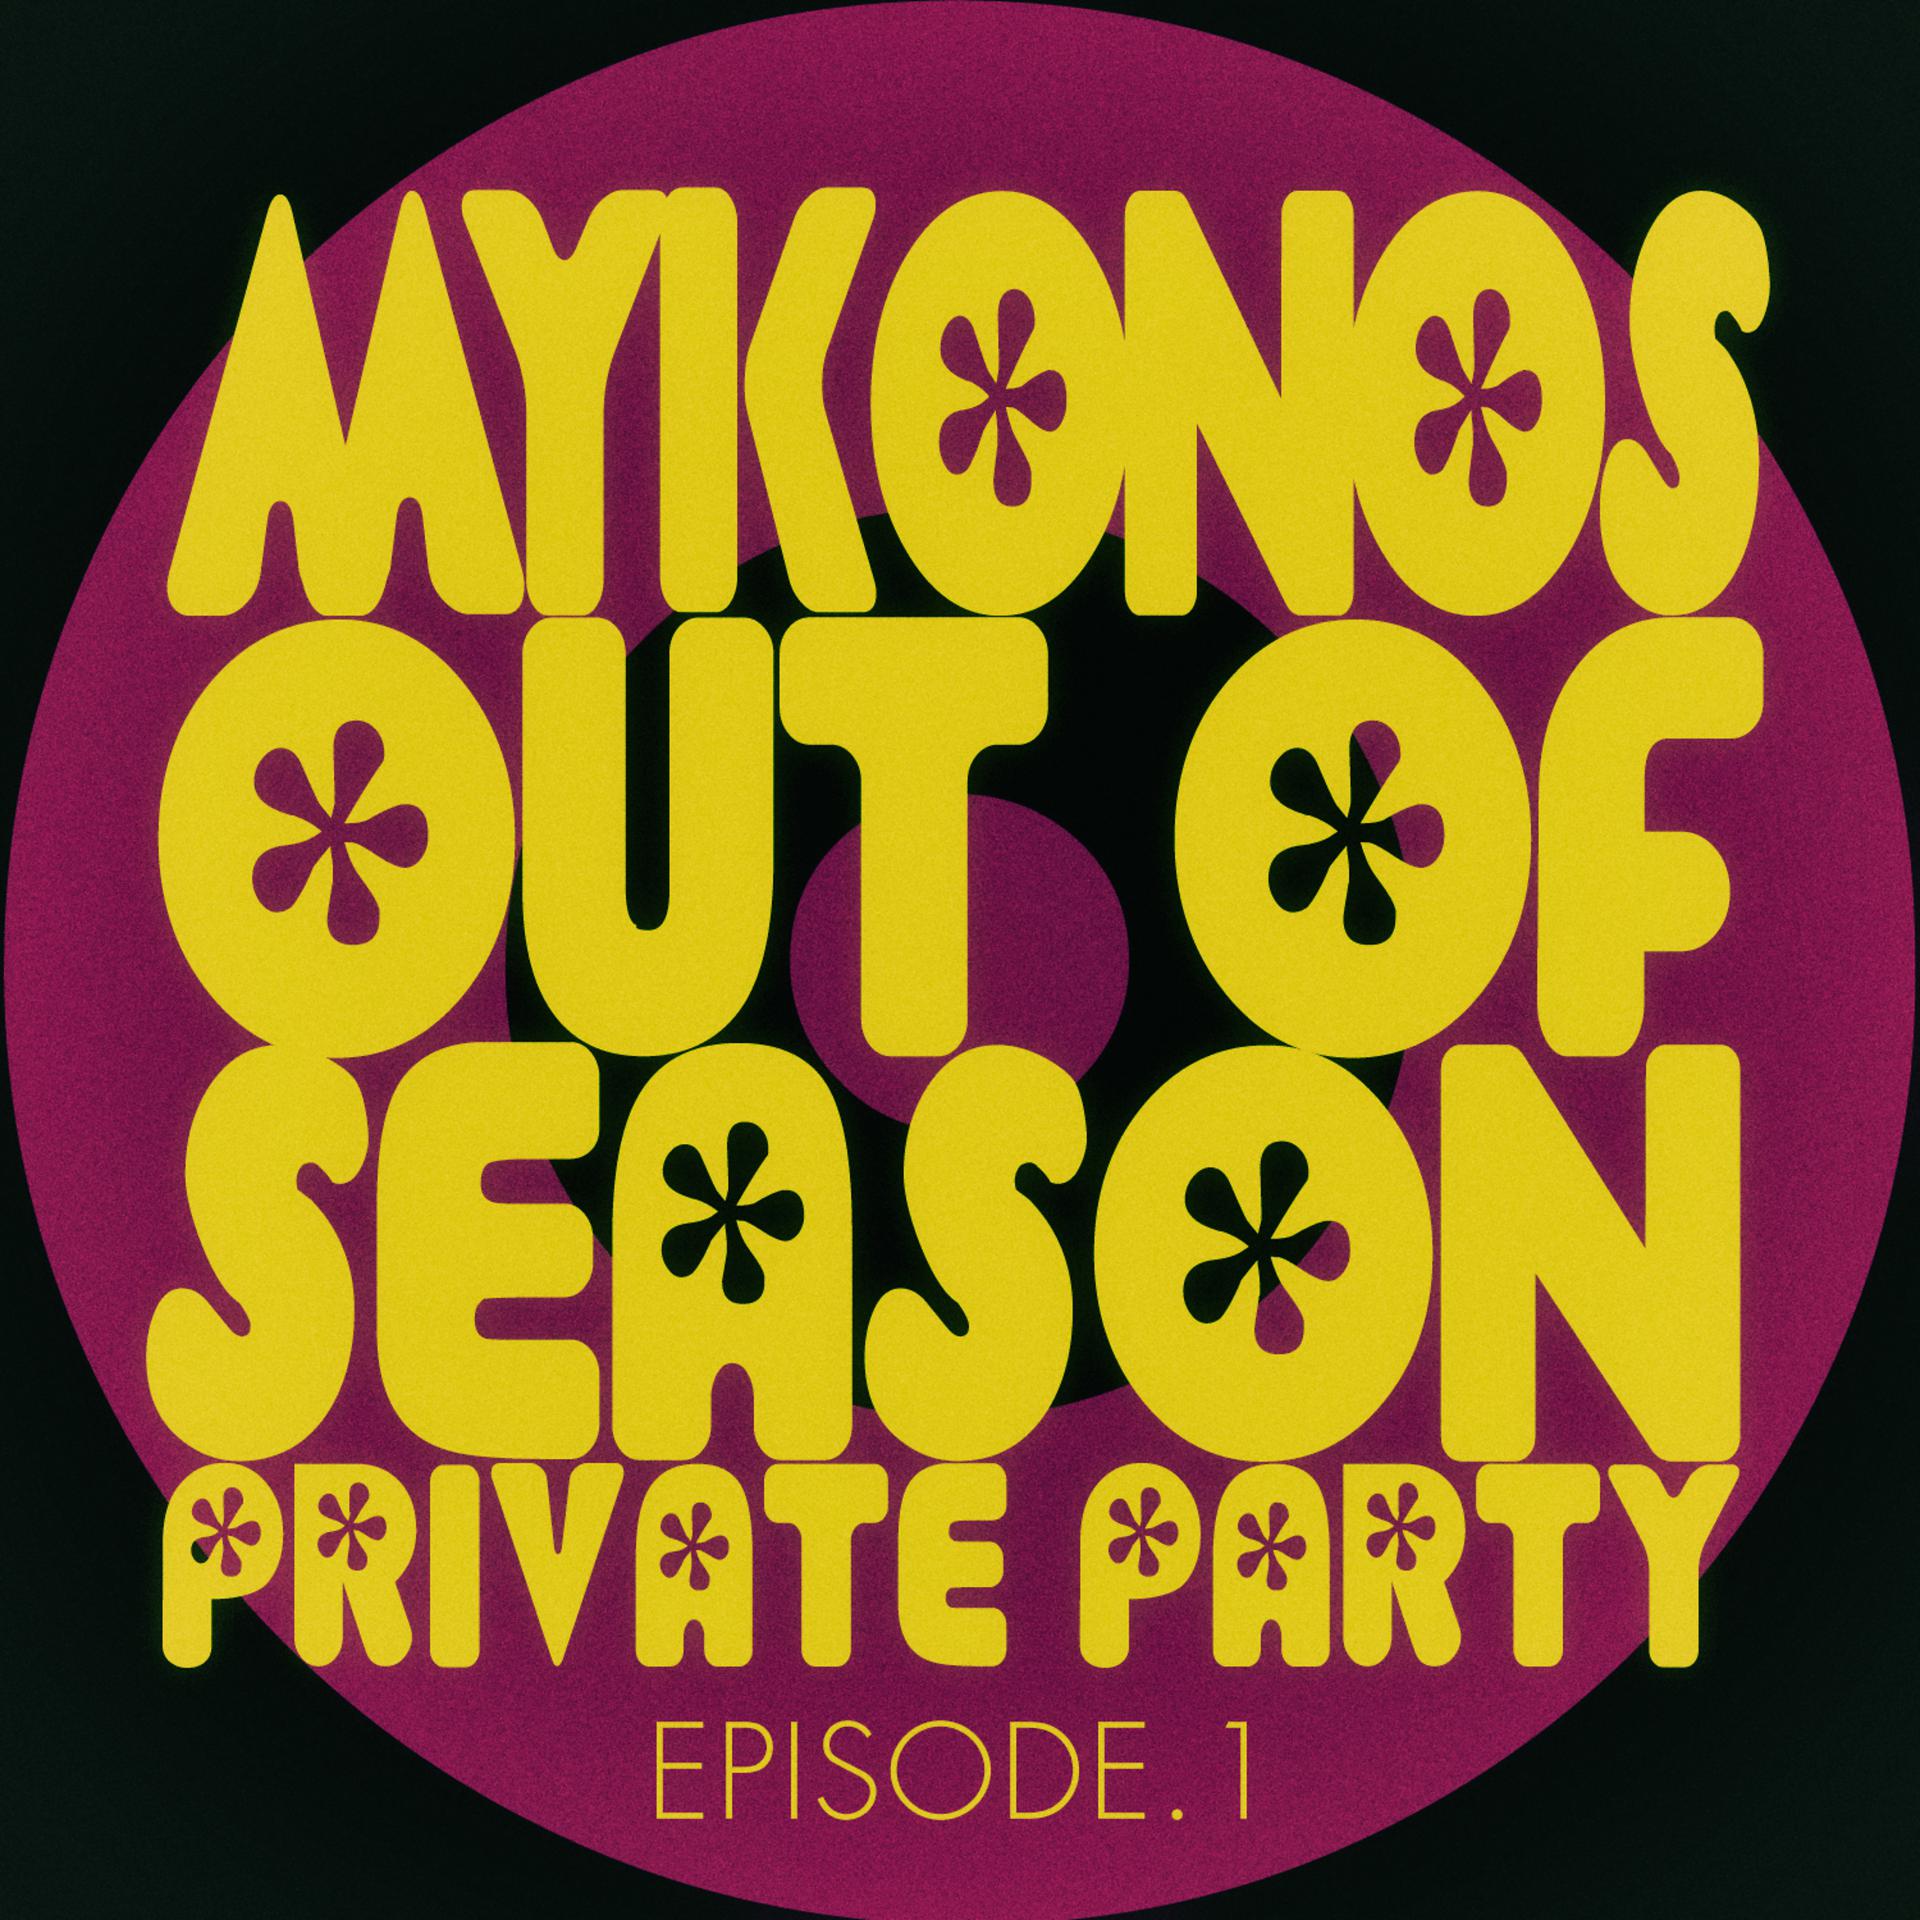 Постер альбома #mykonos out of Season Private Party - Episode.1